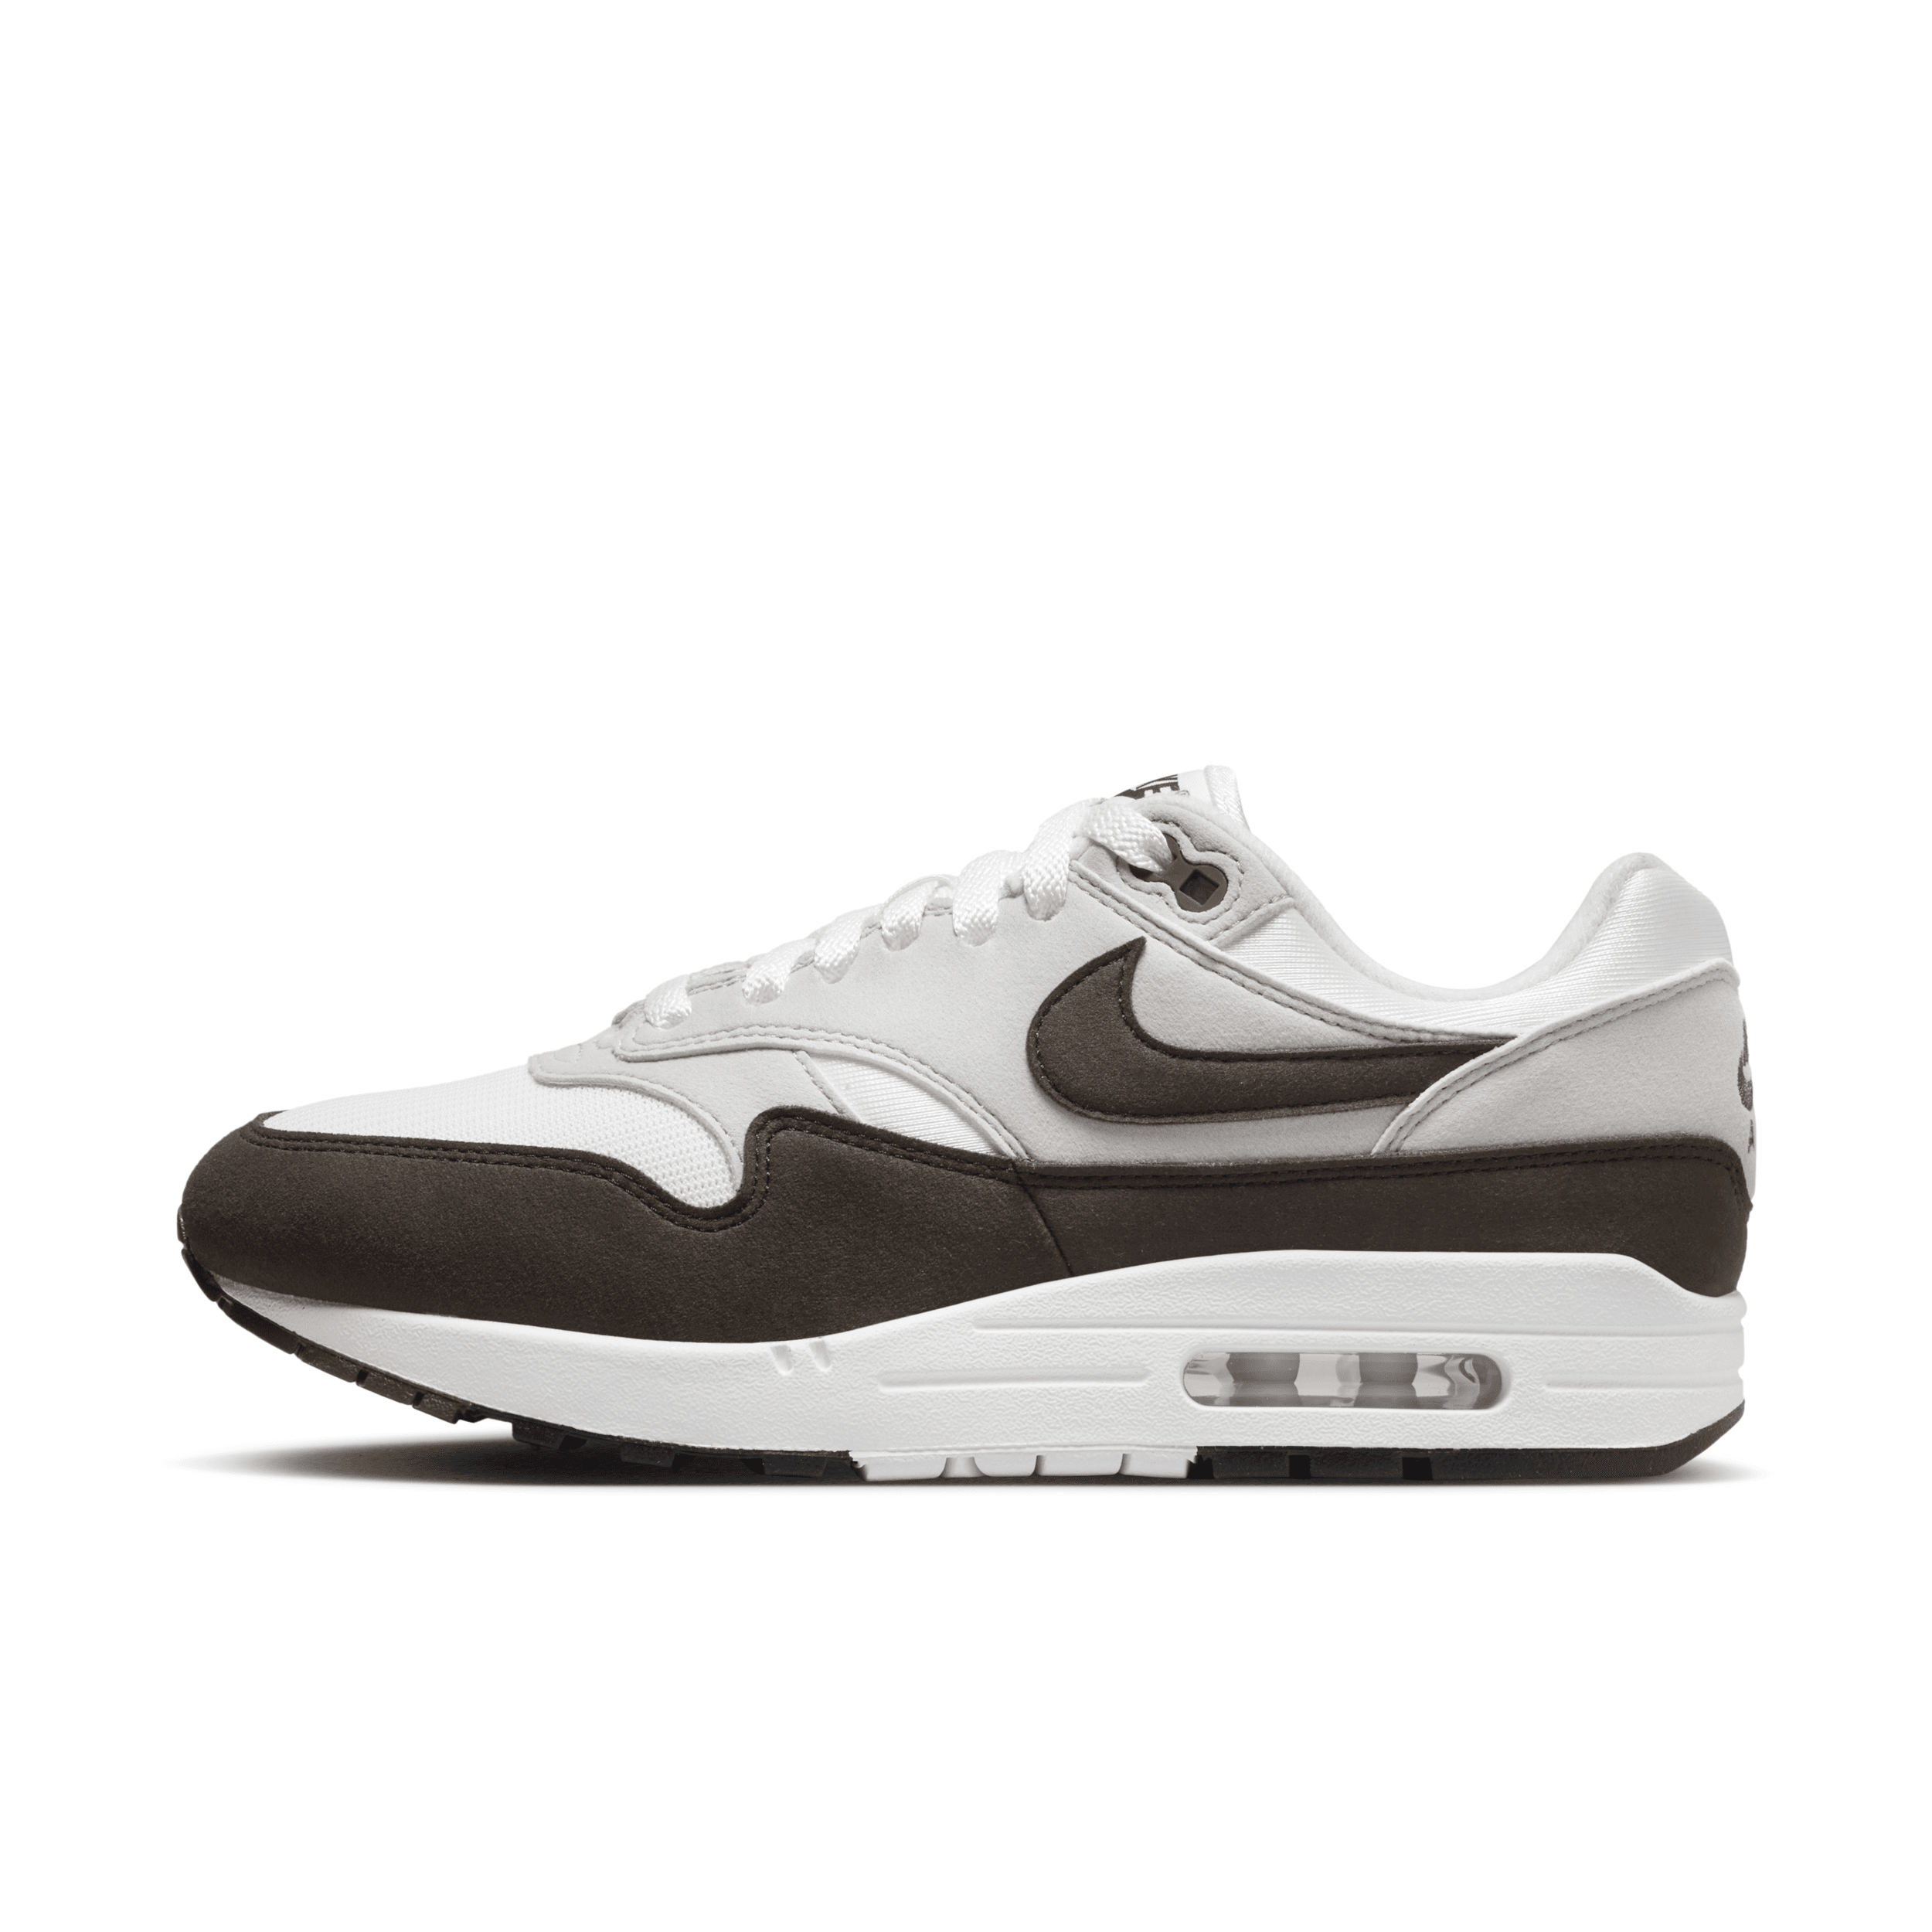 Nike Women's Air Max 1 Shoes In Brown